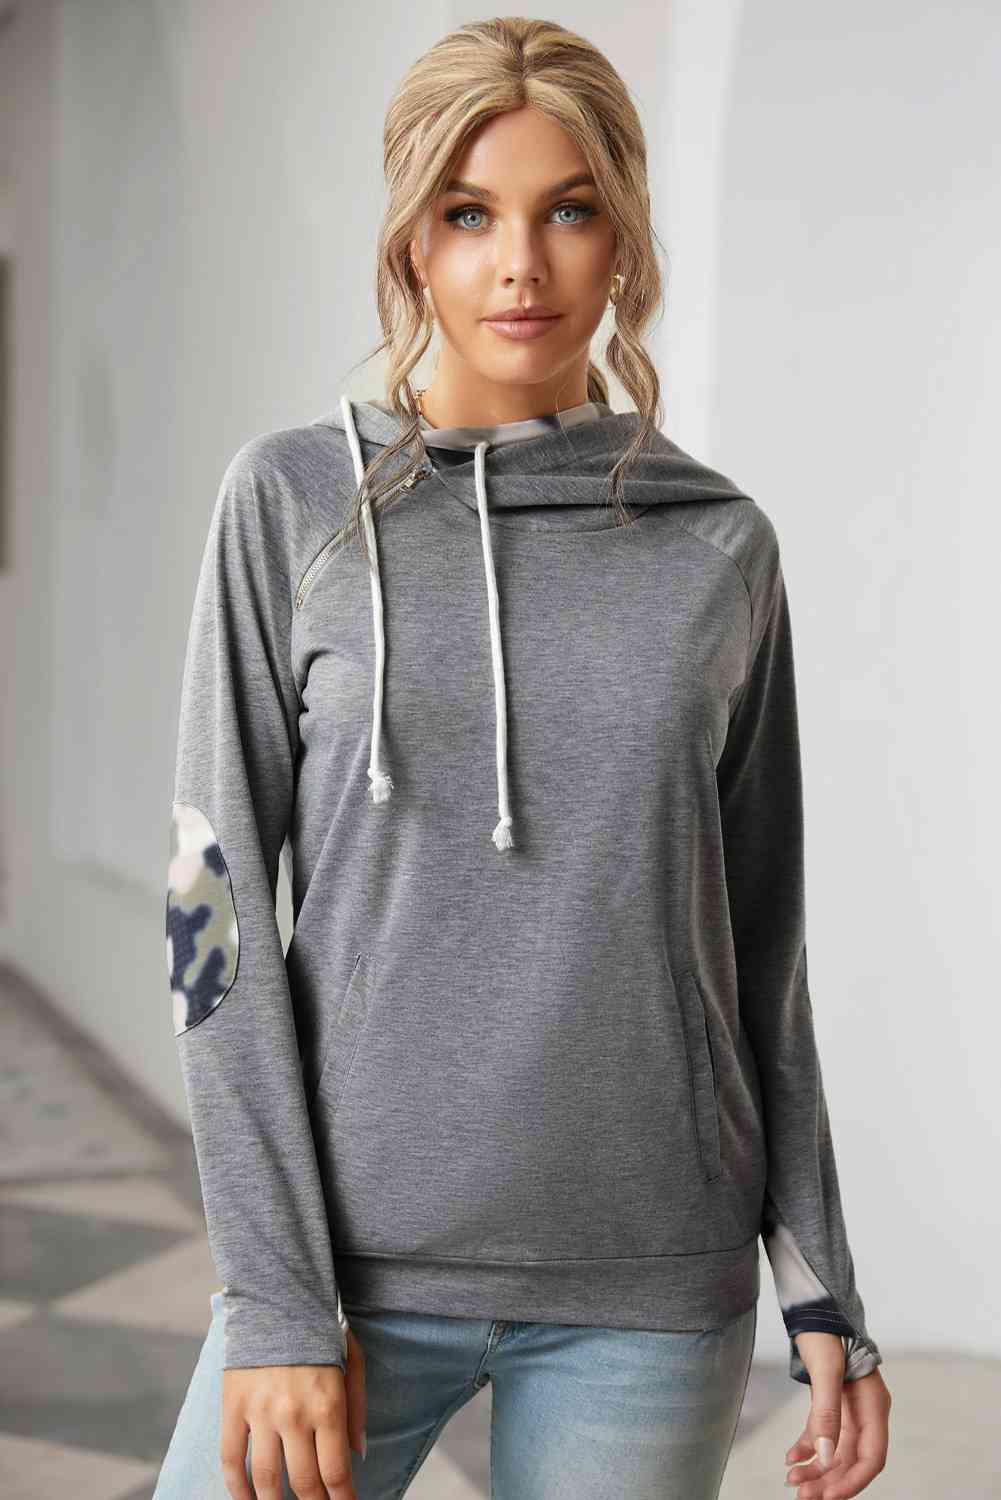 Side Zip Sweatshirt with Front Pocket - By Baano